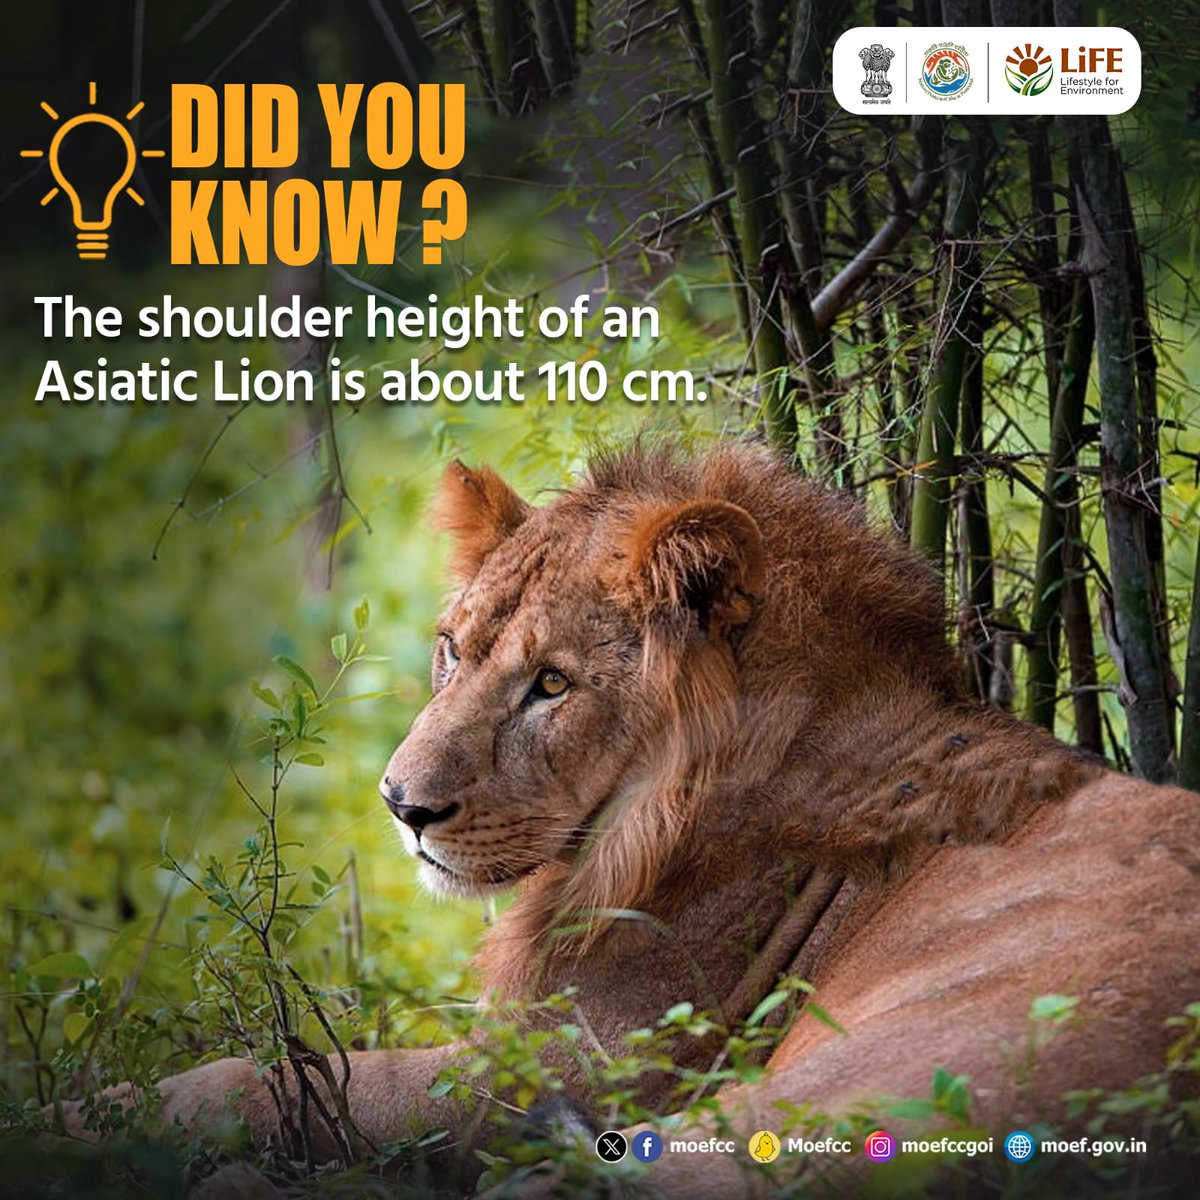 #ChooseLiFE #MissionLiFE @moefcc DID YOU KNOW? The shoulder height of an Asiatic Lion is about 110 cm. @NWRailways